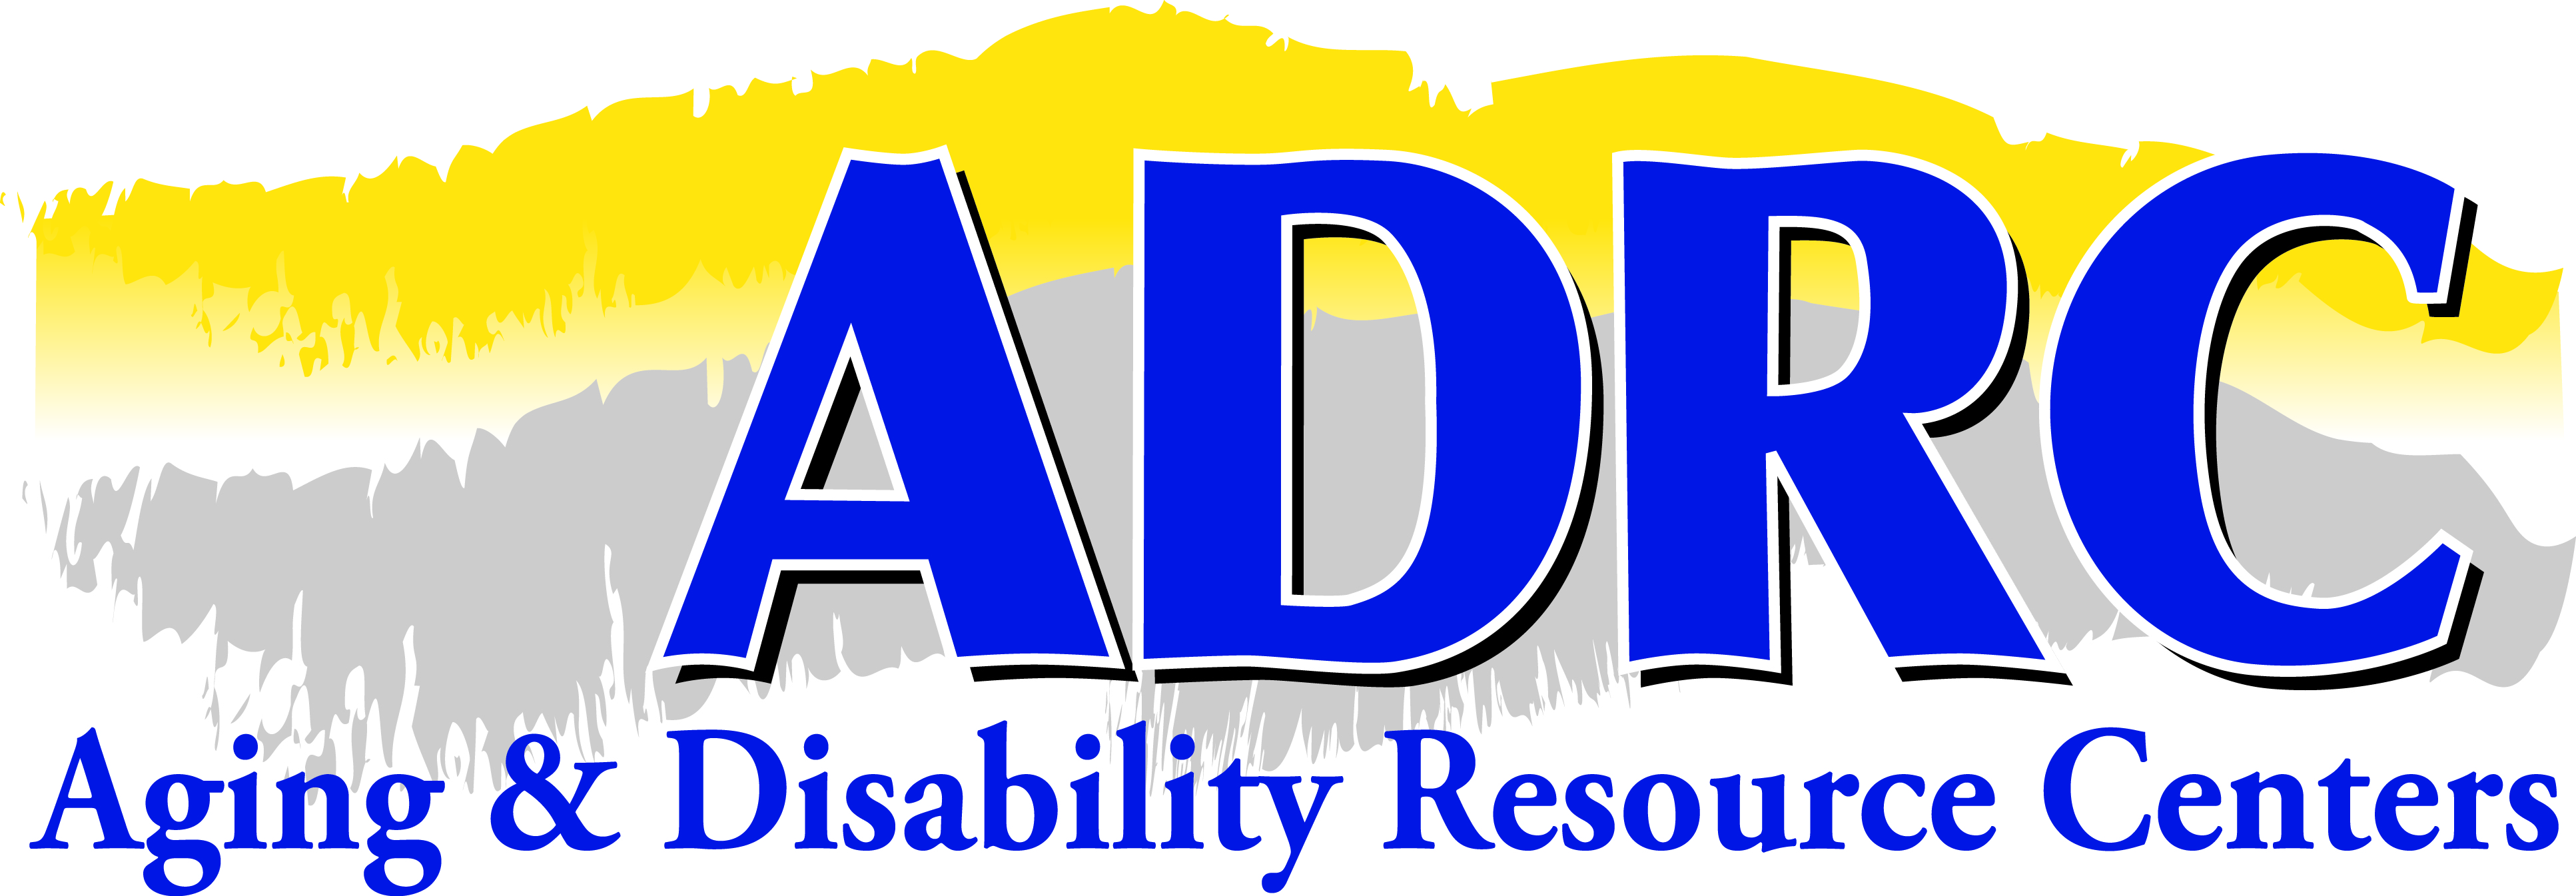 ADRC logo with blue letters and yellow and grey mountian/aurora-like design in background